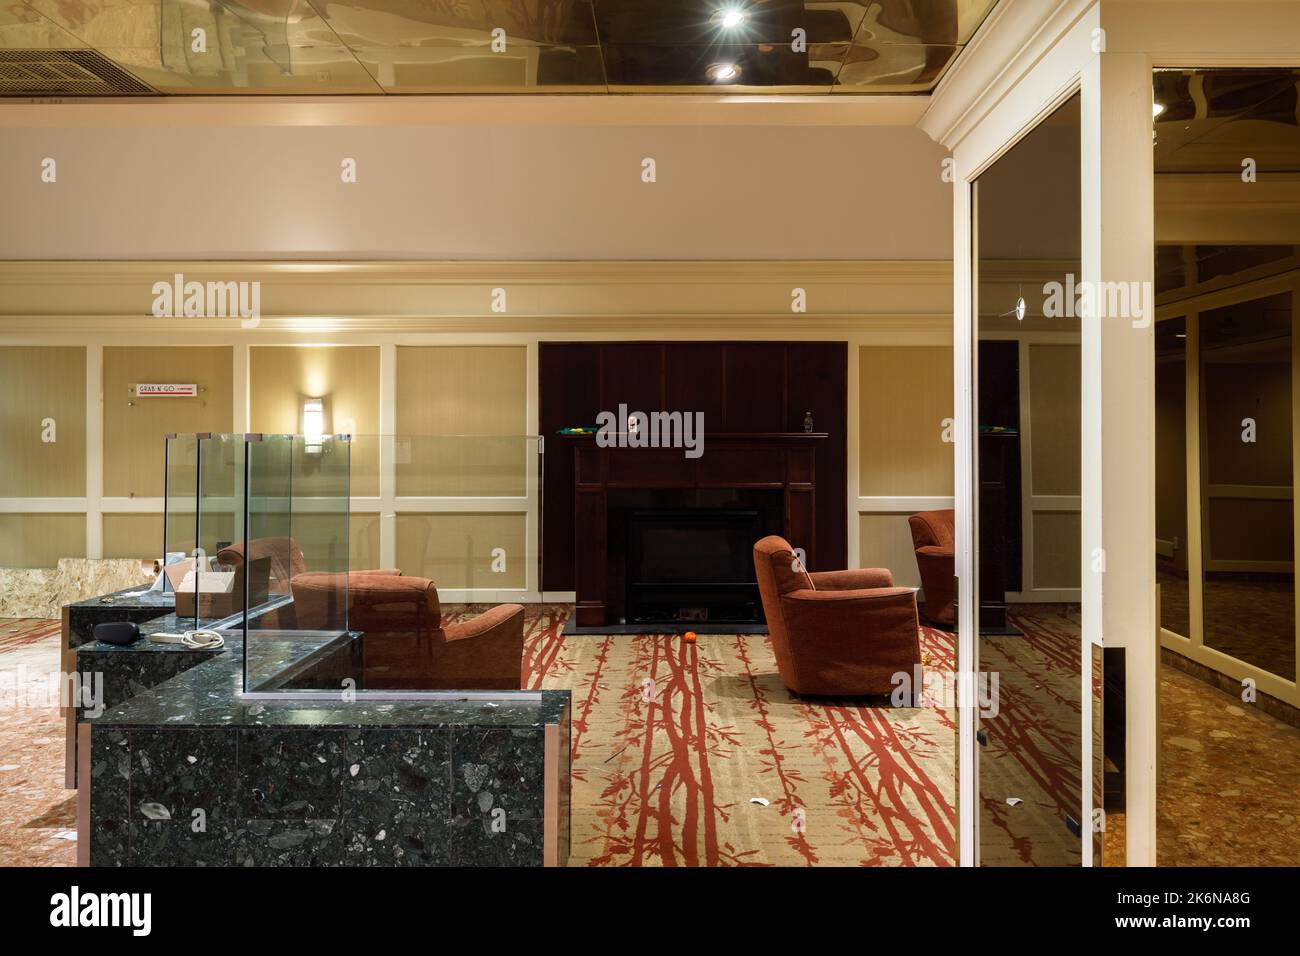 Lounge area of the lobby at the now demolished Holiday Inn Yorkdale Hotel in Toronto, Ontario, Canada. Stock Photo